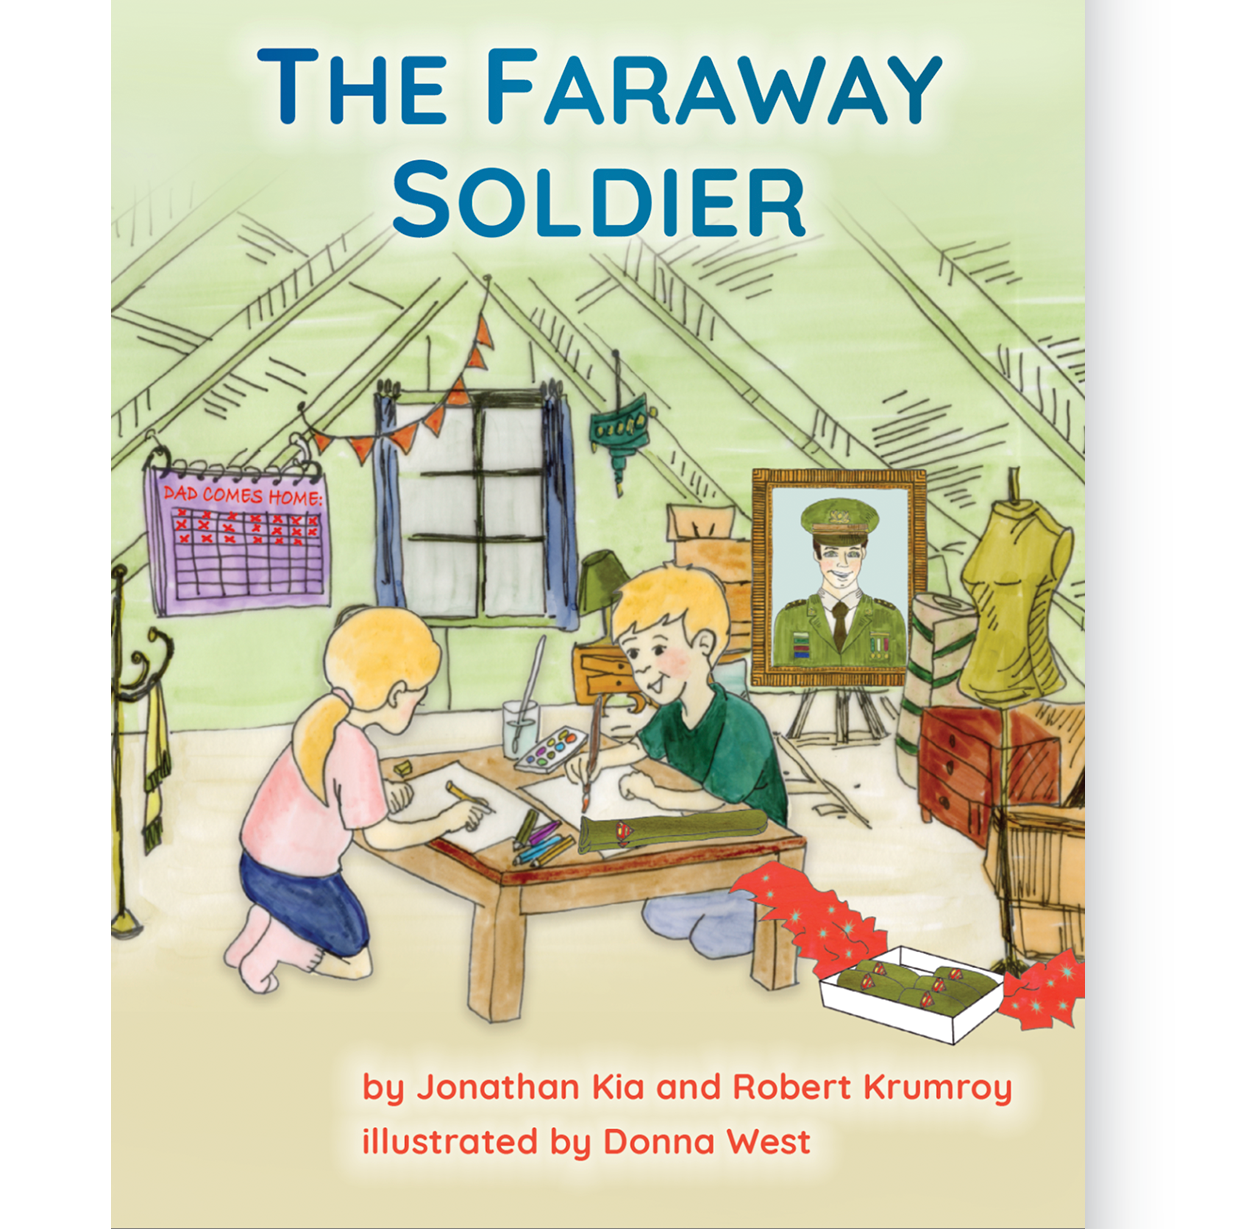 The Faraway Soldier (Ages 4 to 12)